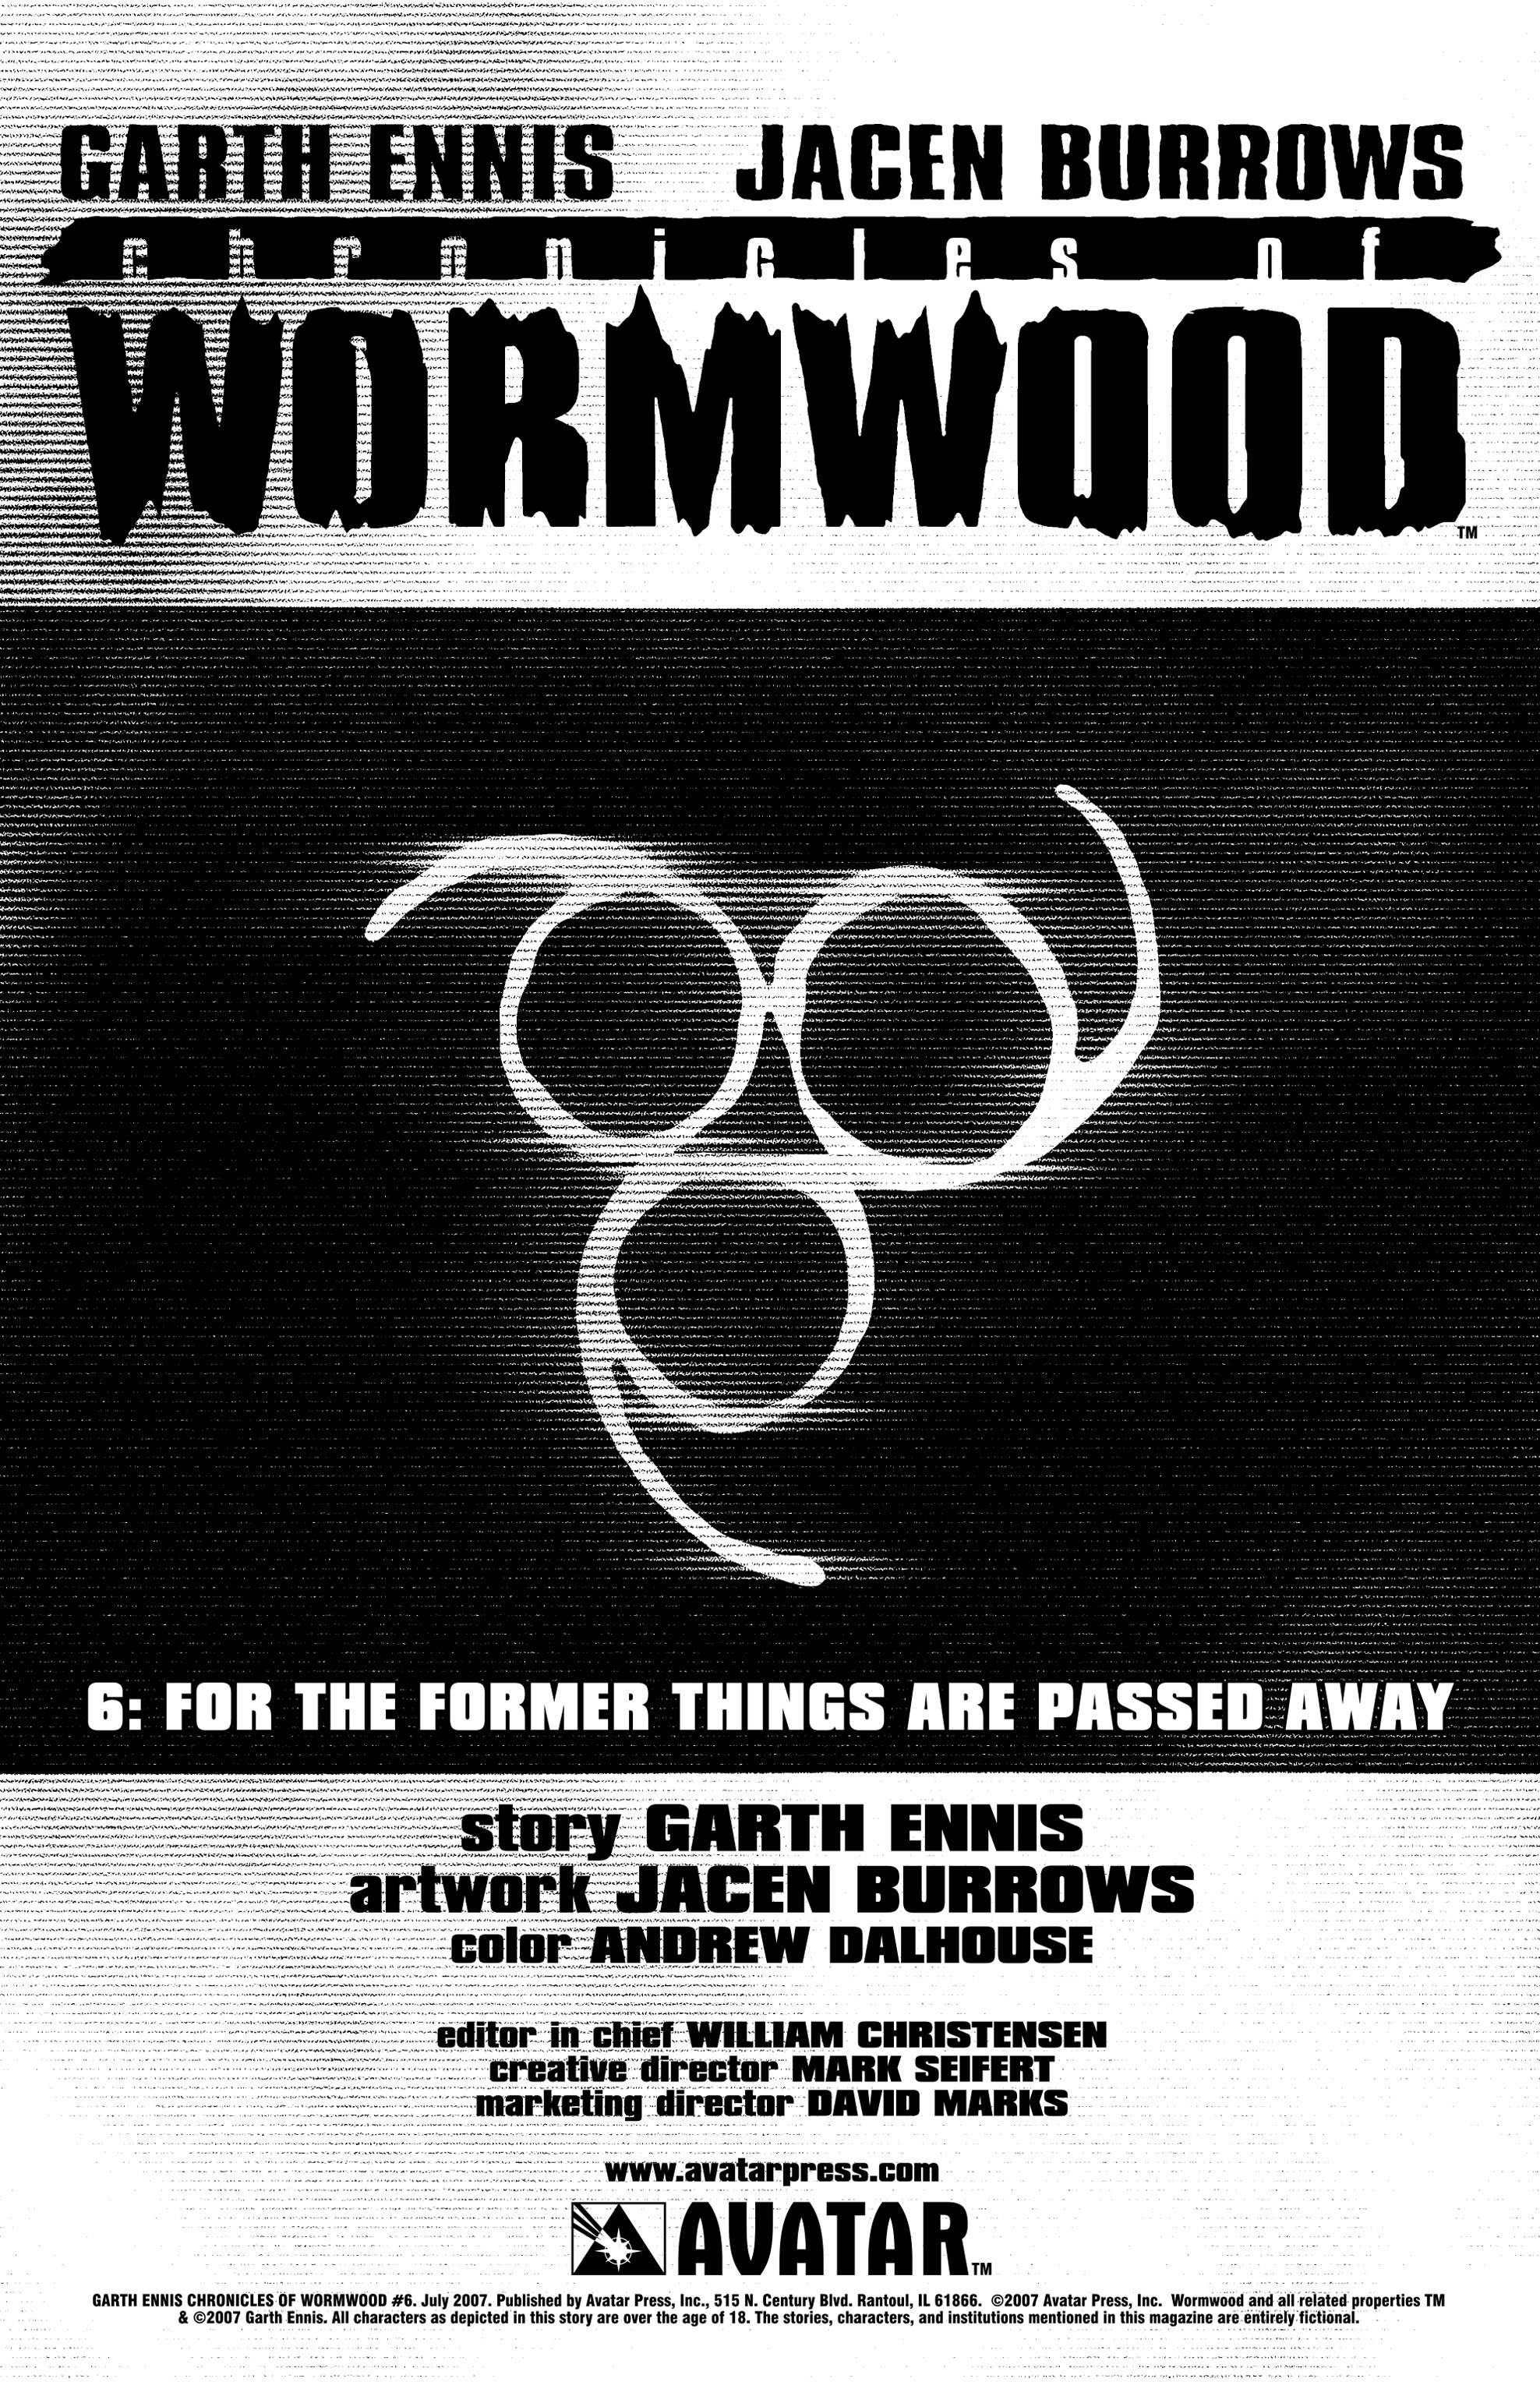 Read online Chronicles of Wormwood comic -  Issue #6 - 2